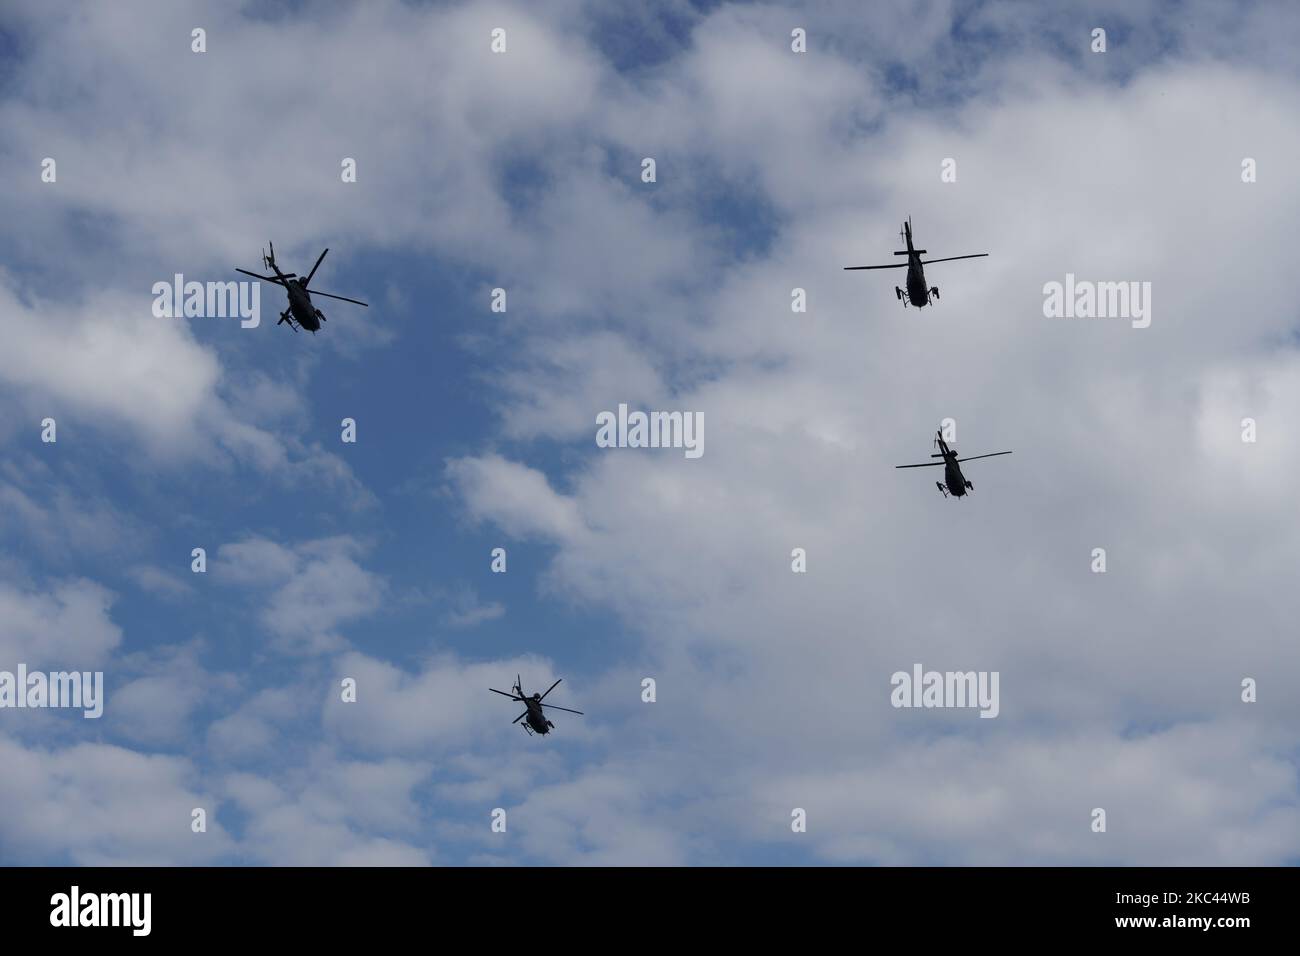 Kiowa Warrior helicopters during an air show. Greek Air Force Bell OH-58 flying during the National Oxi Day parade in Thessaloniki, Greece. Stock Photo